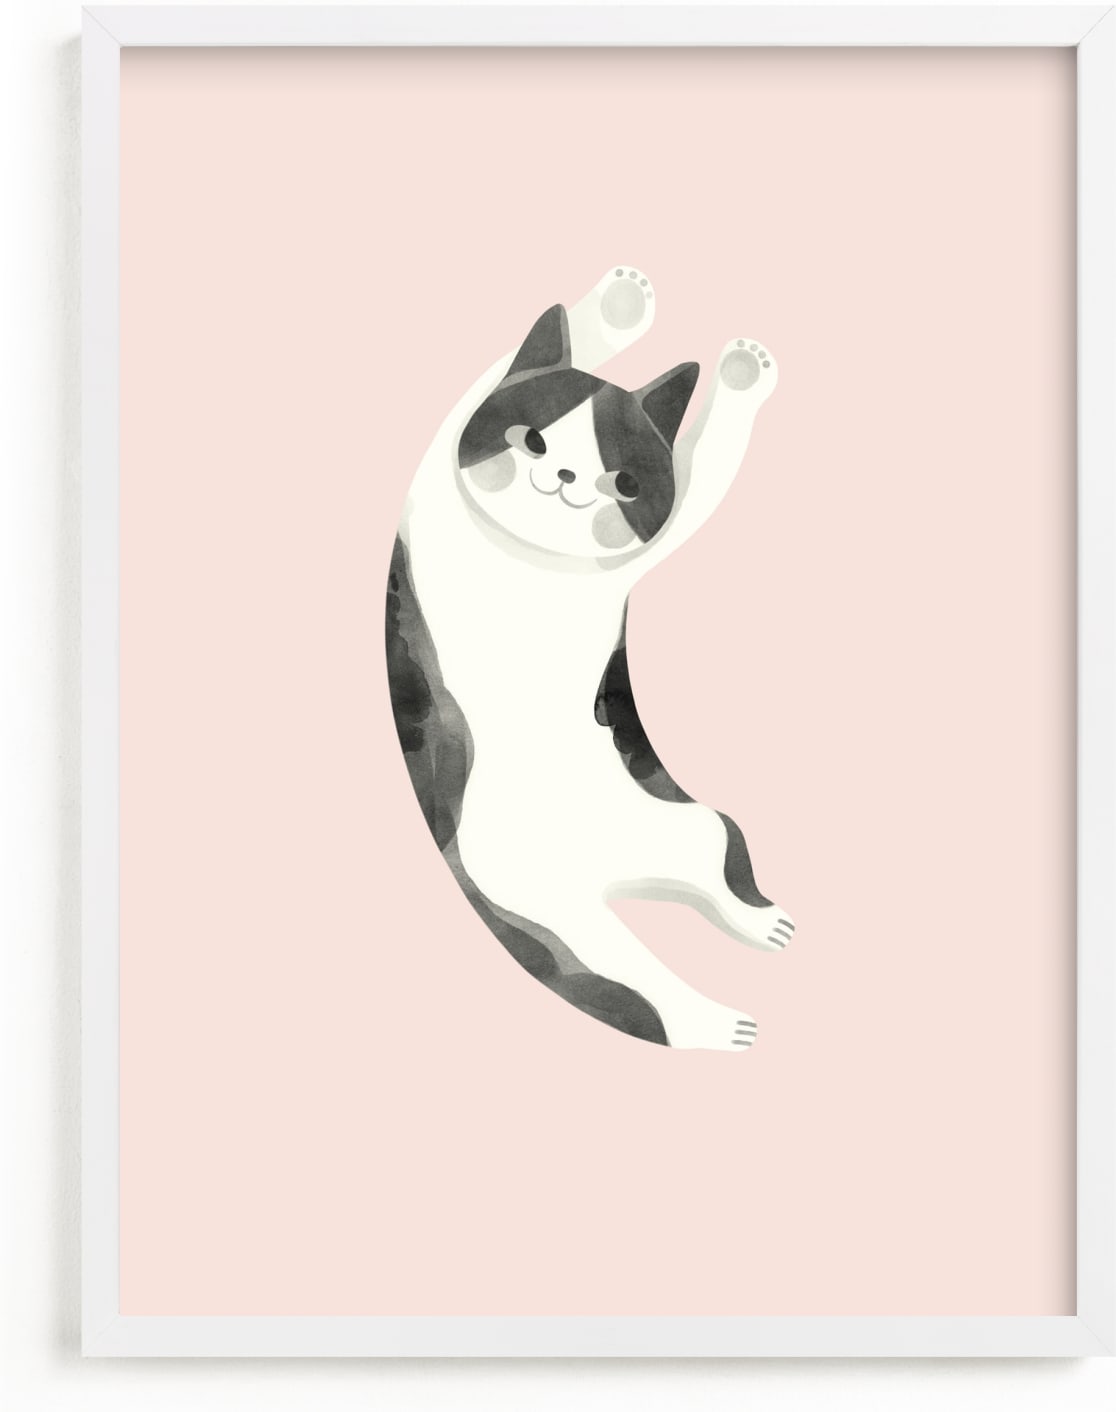 This is a pink nursery wall art by Vivian Yiwing called Feline.